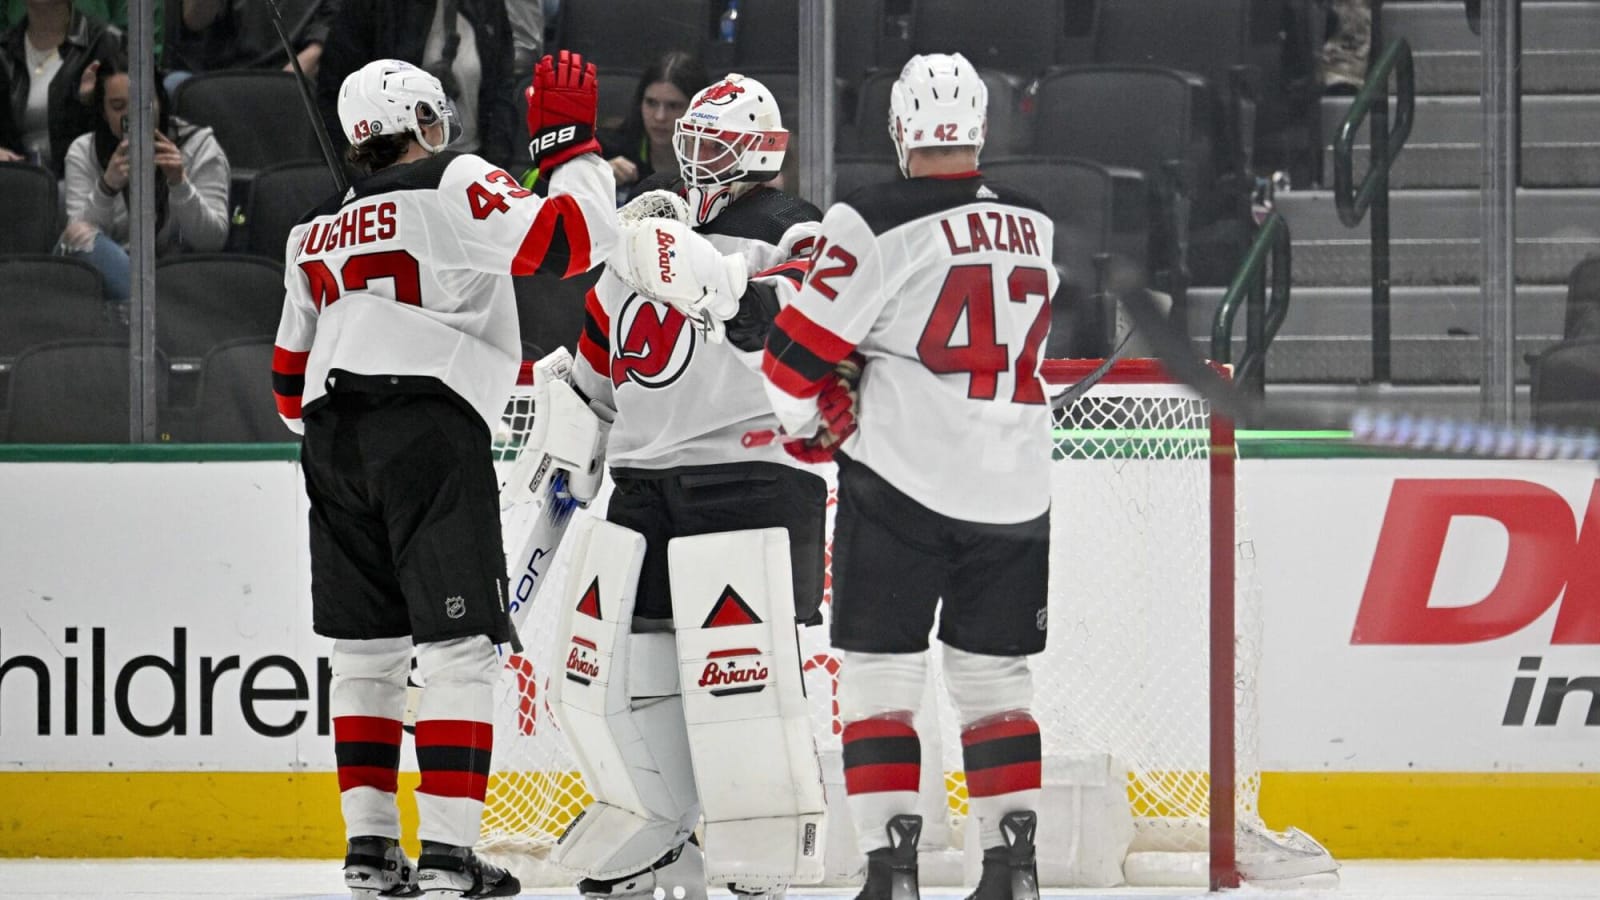 The New Jersey Devils have little room for error as team chases playoff spot